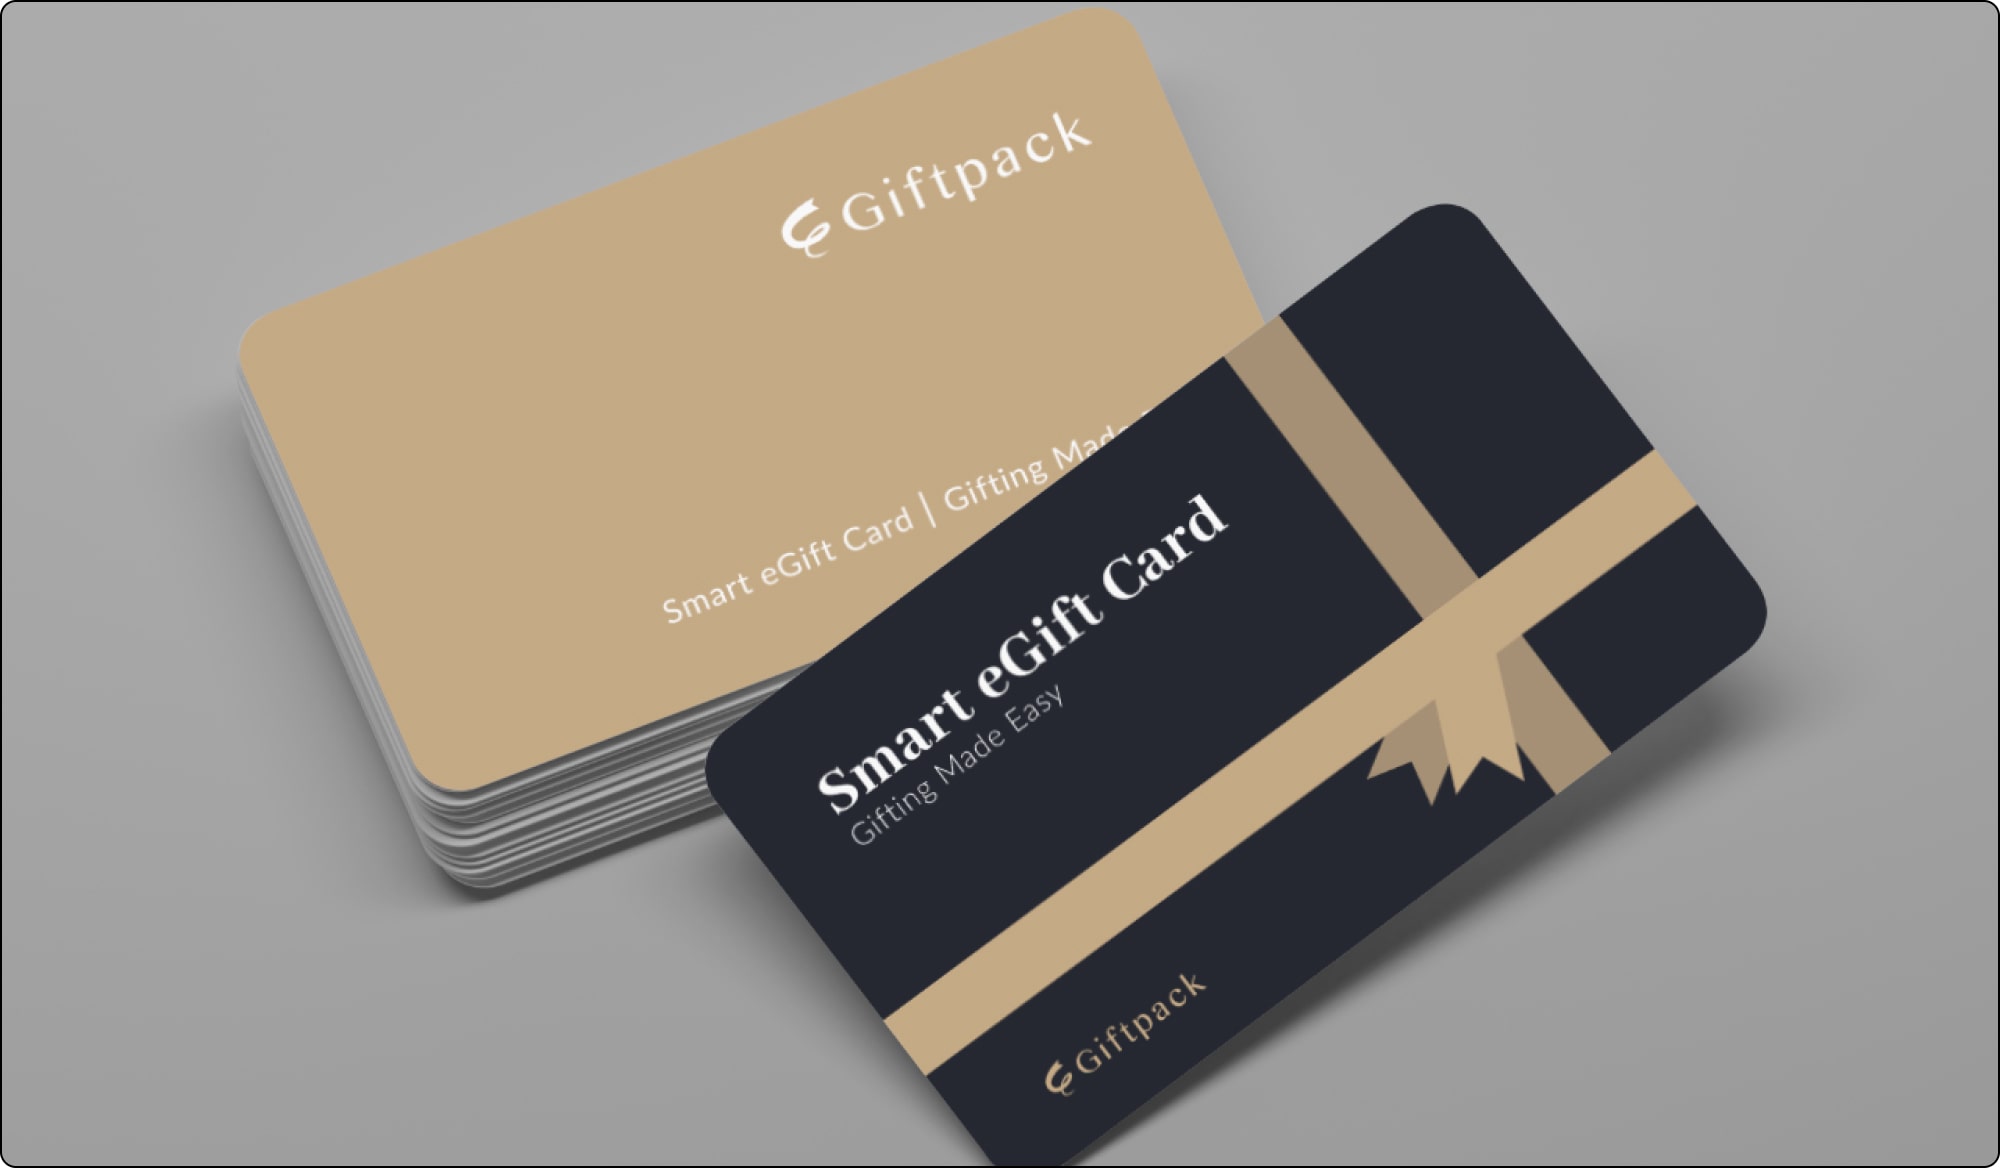 giftpack smart egift card for 350 brands for expensive employee appreciation gifts